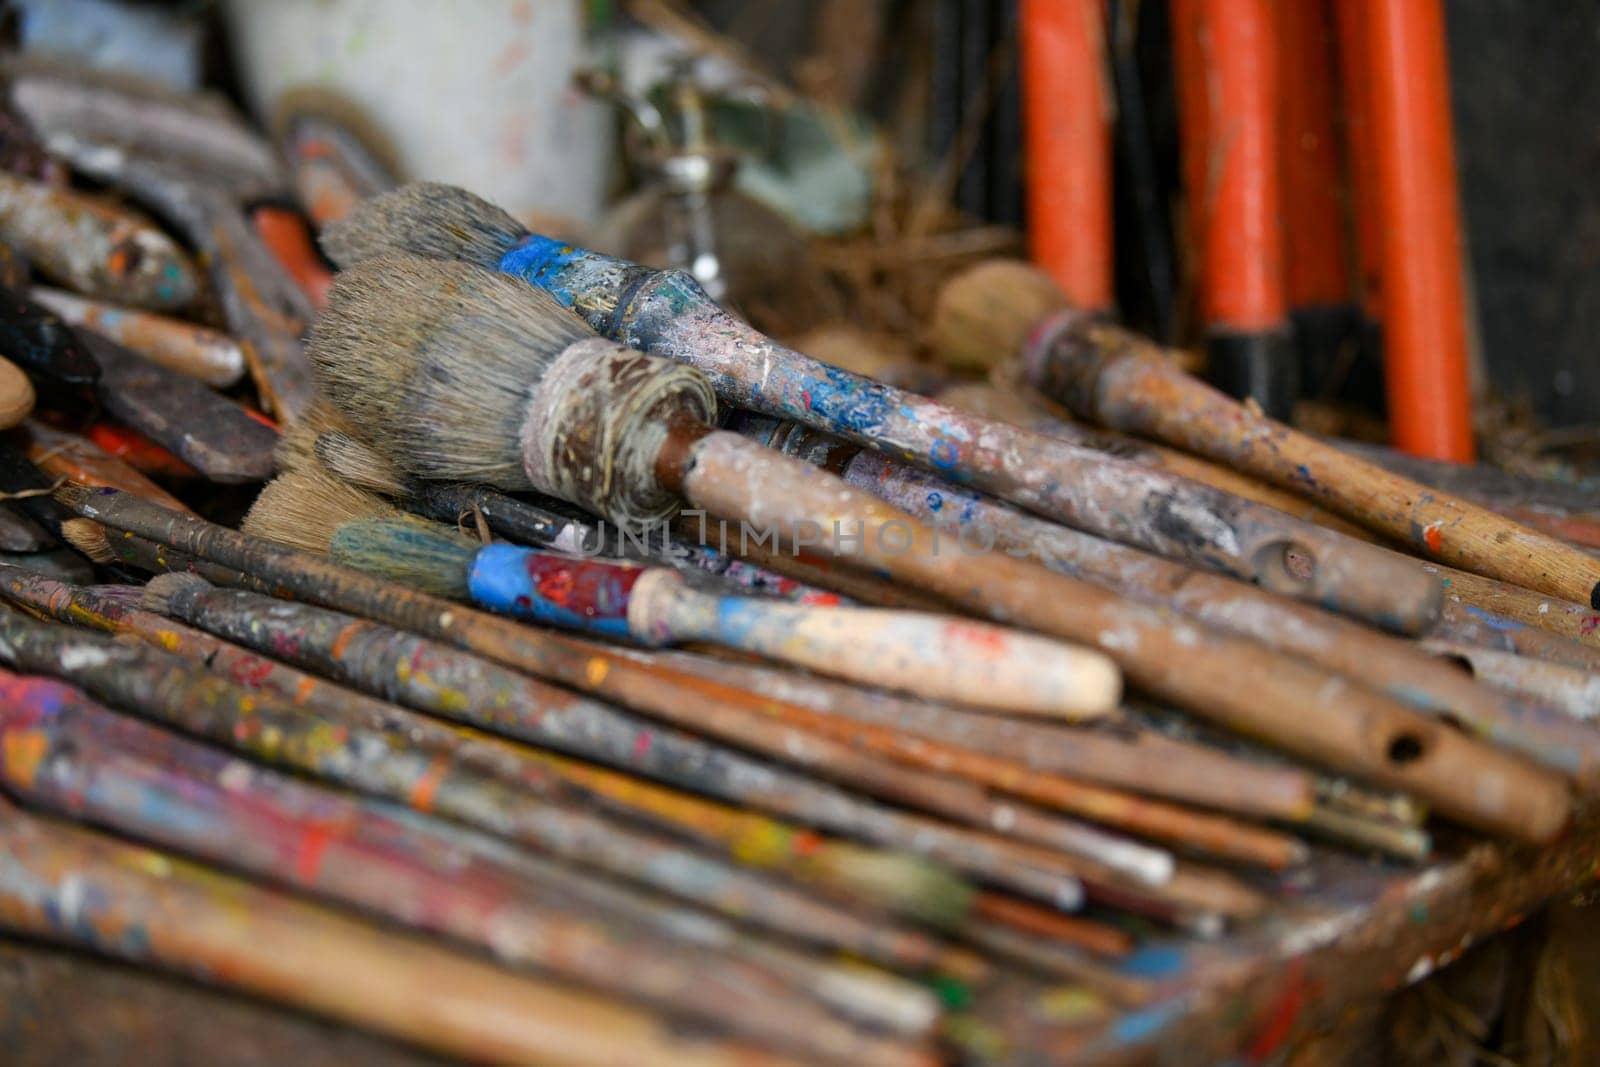 Many used dirty brushes of the artist in the workshop